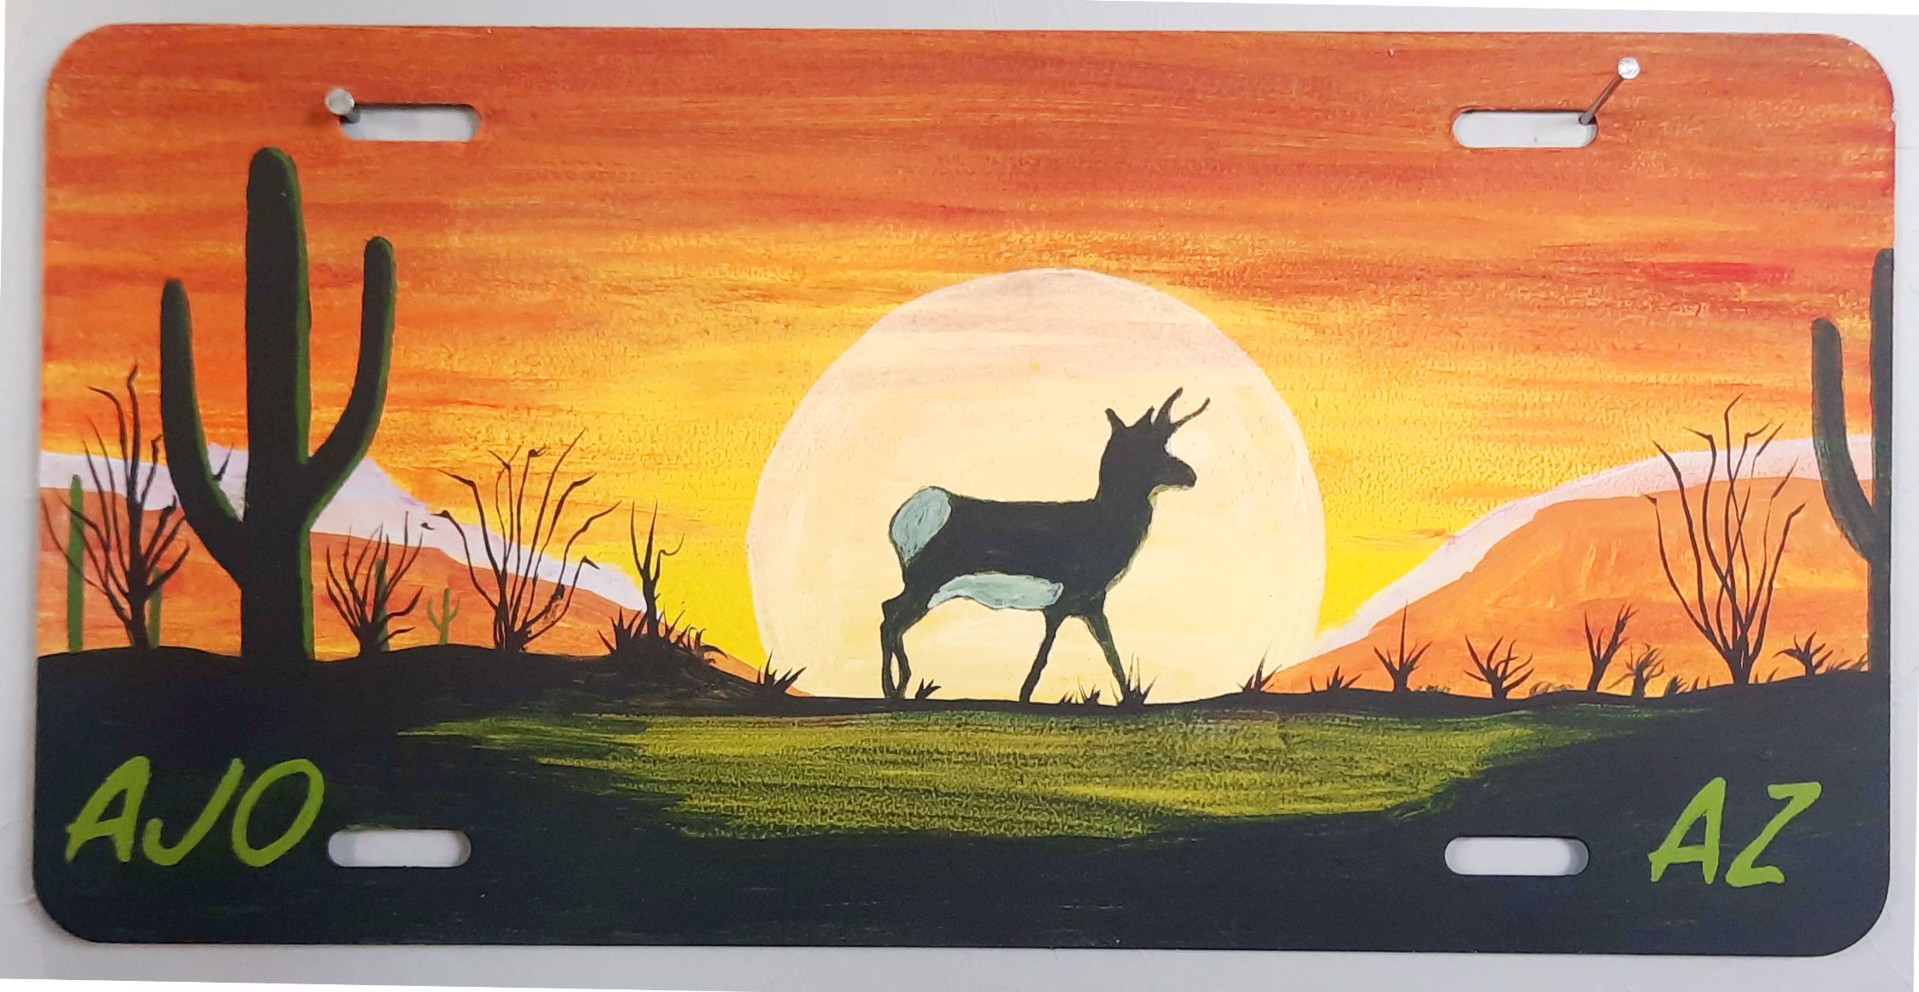 Pronghorn Sunset, License Plate, 117 by John Wulf